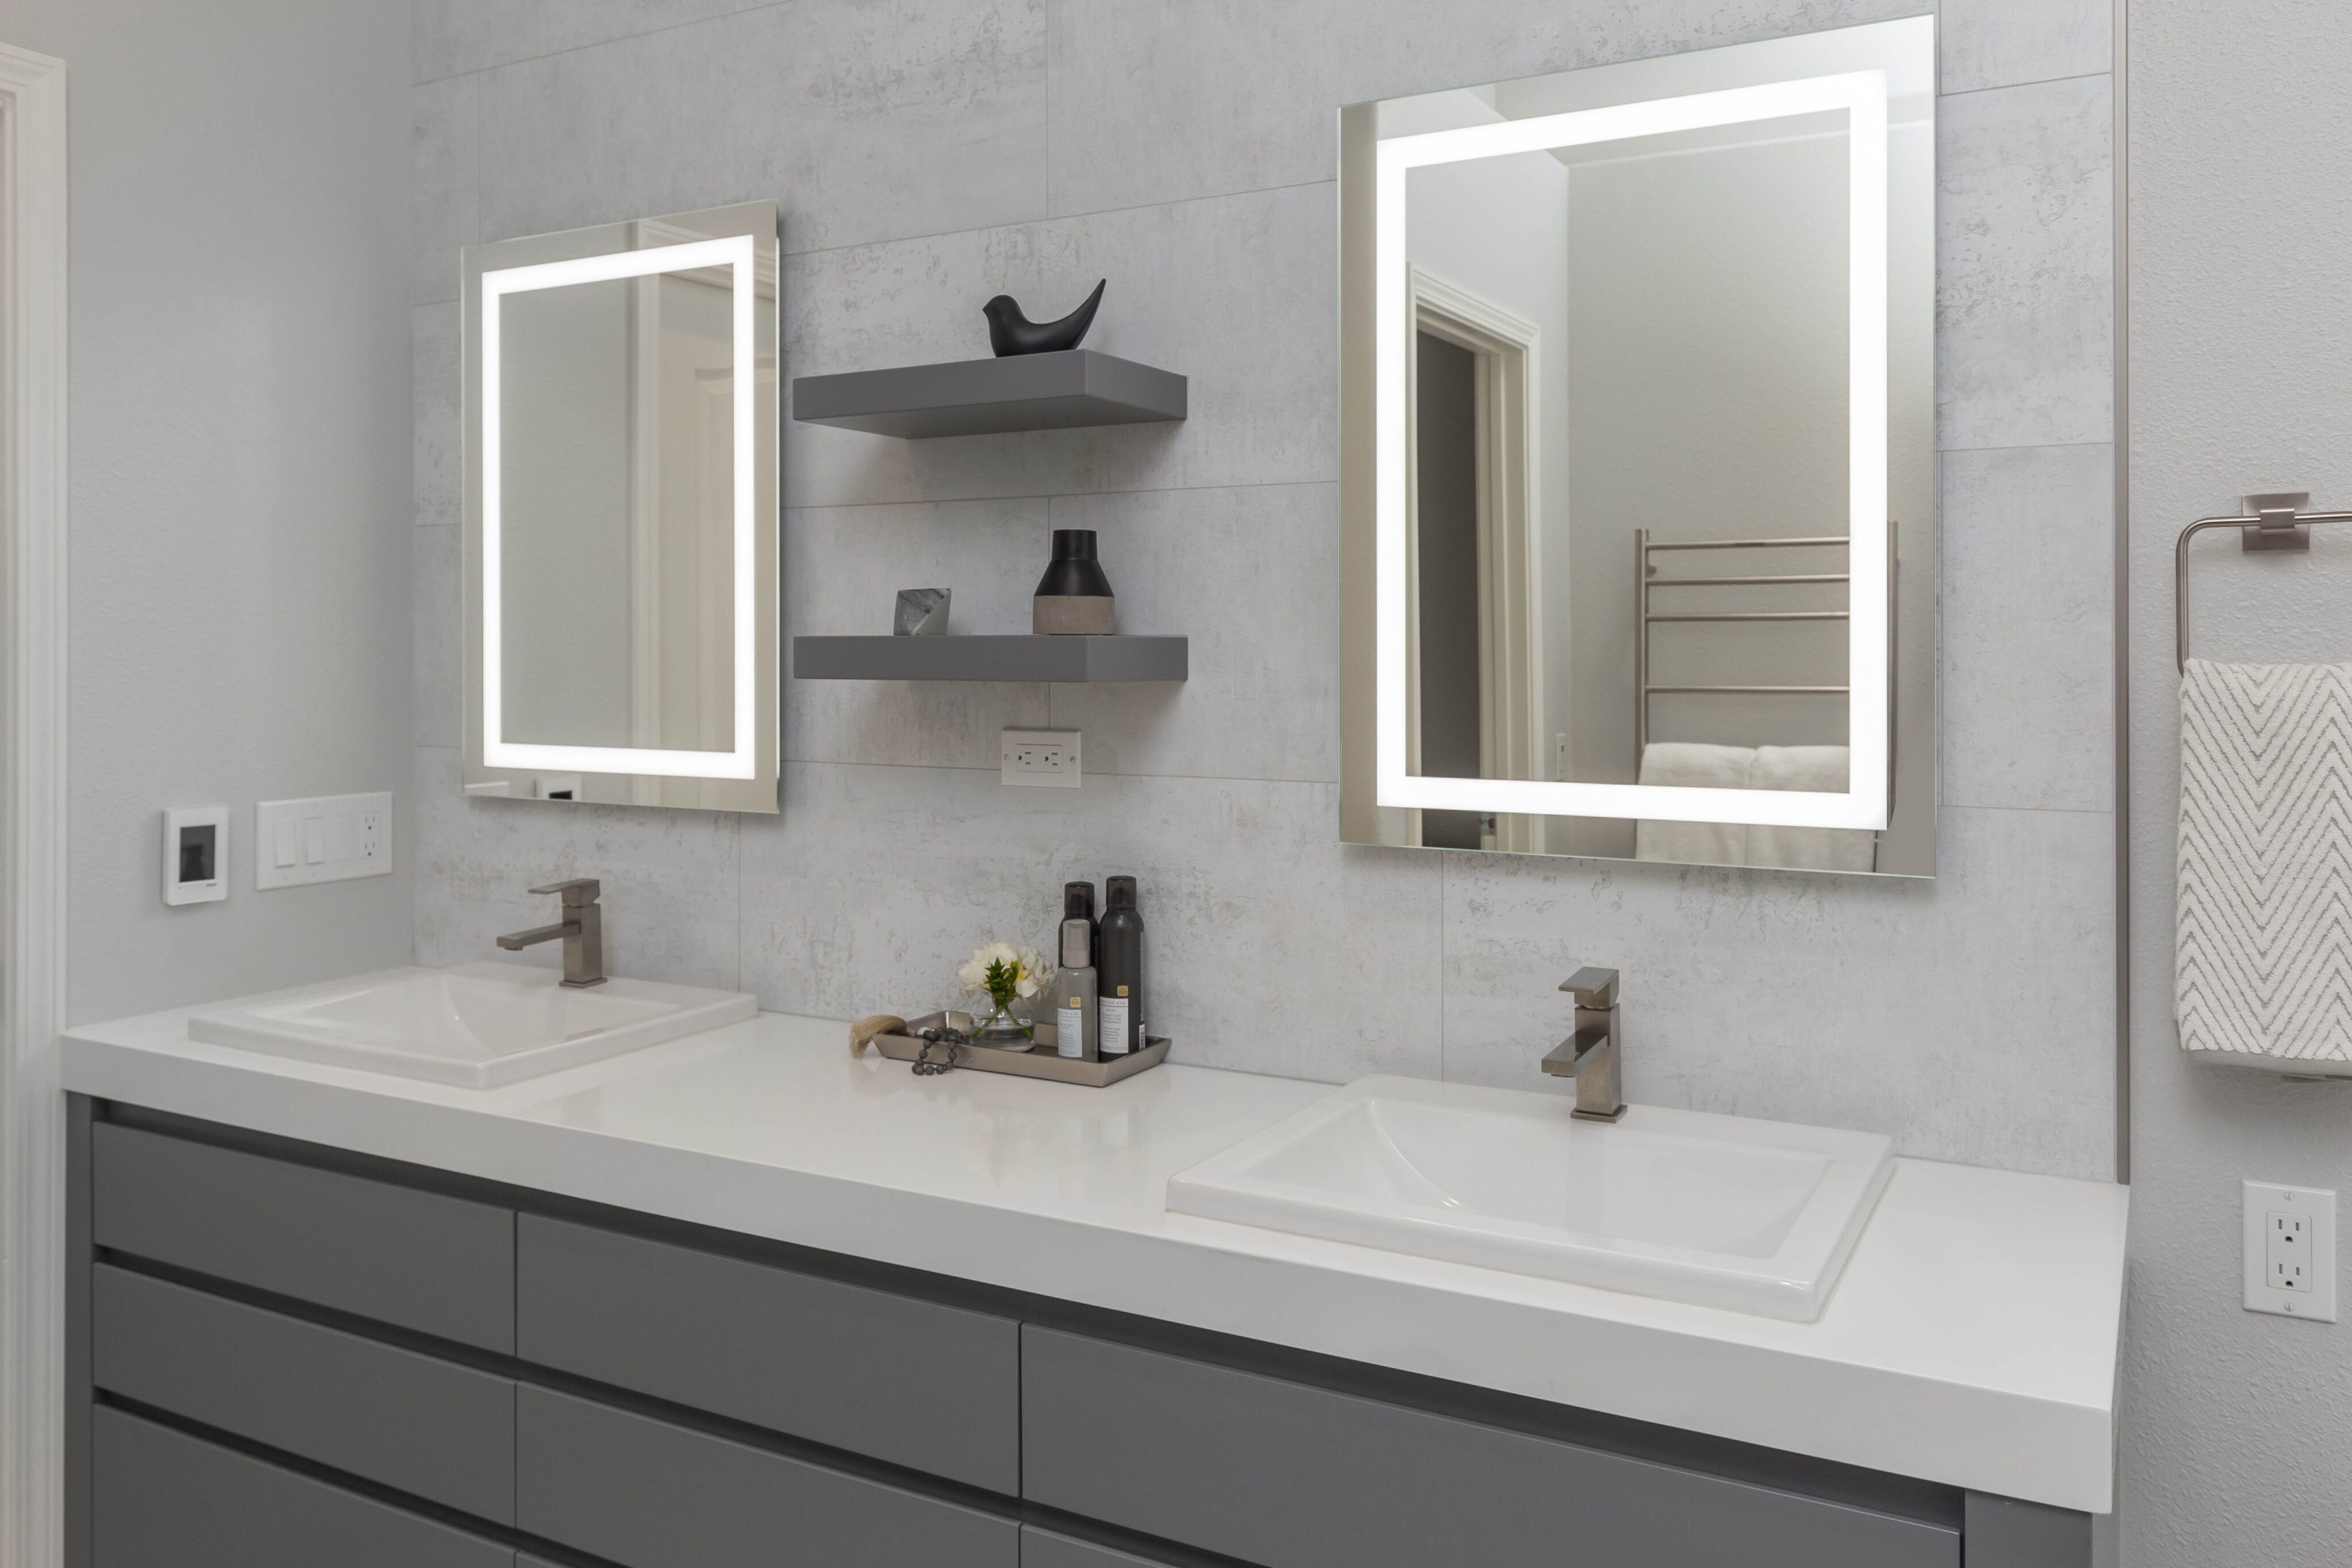 An emphasis on clean cut lines in a bathroom remodel also helps make the space seem bigger